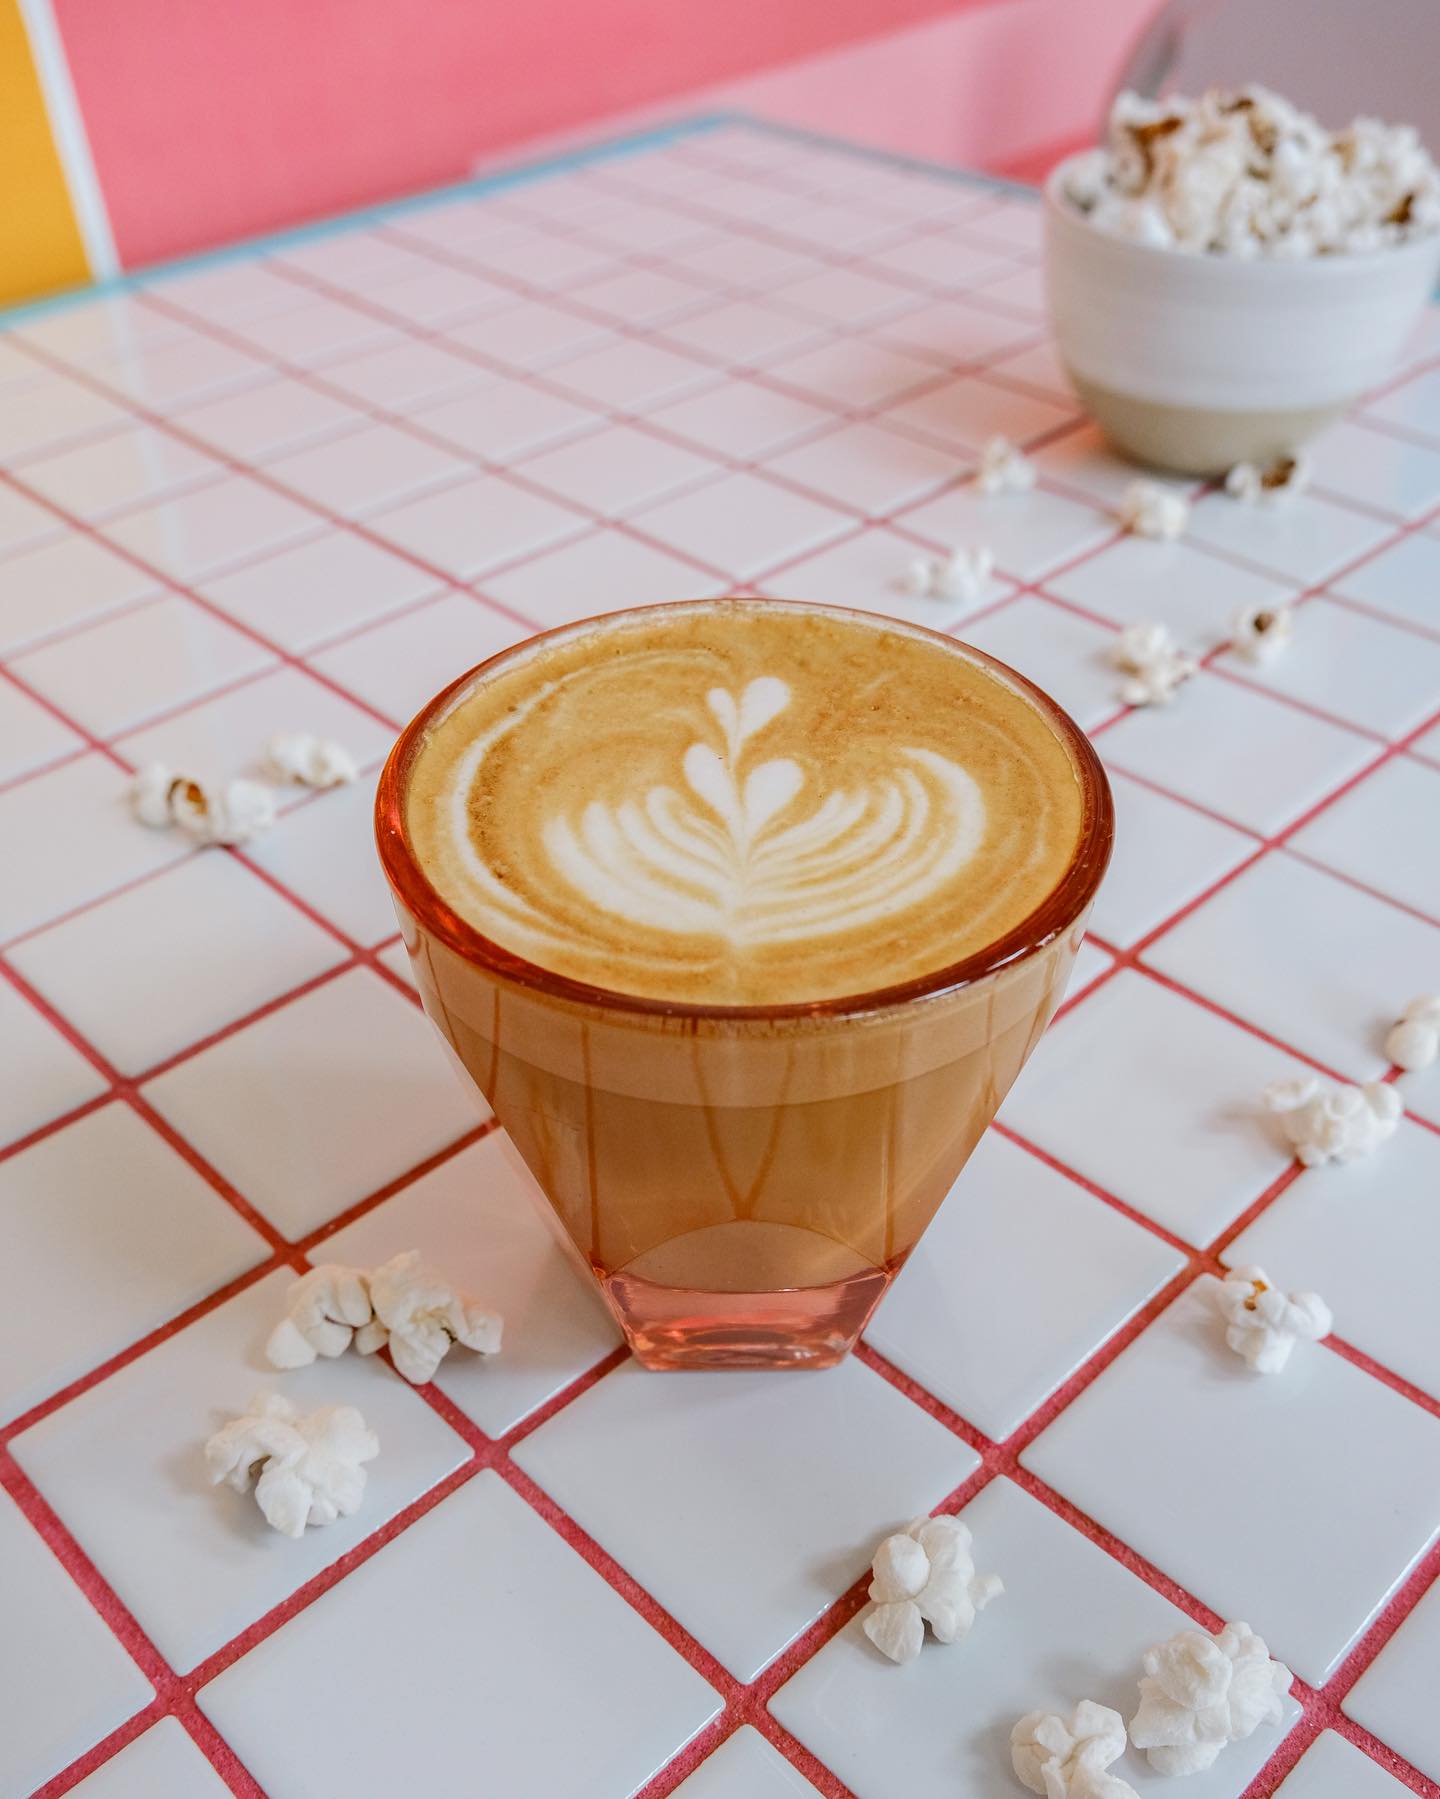 A cup of a coffee in a clear red glass with latte art surrounded by popcorn kernels